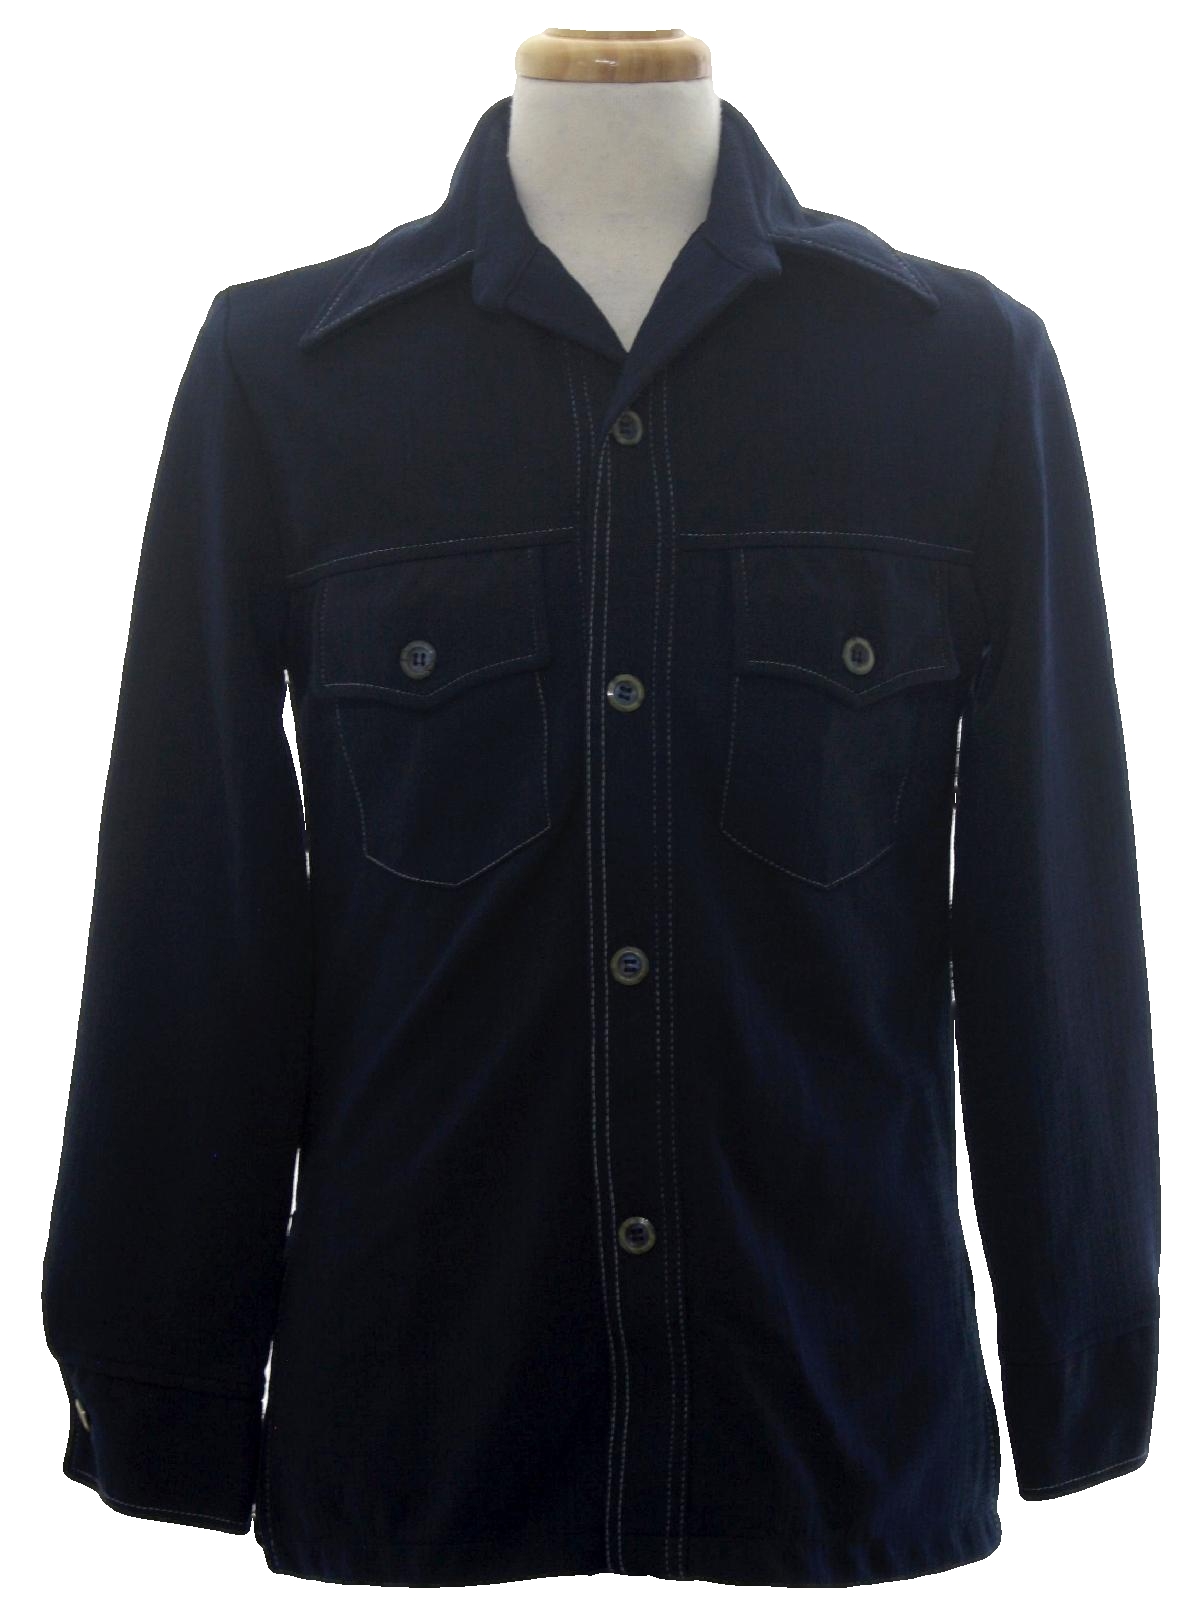 70s Jacket (Style): 70s -Style- Mens navy blue background polyester ...